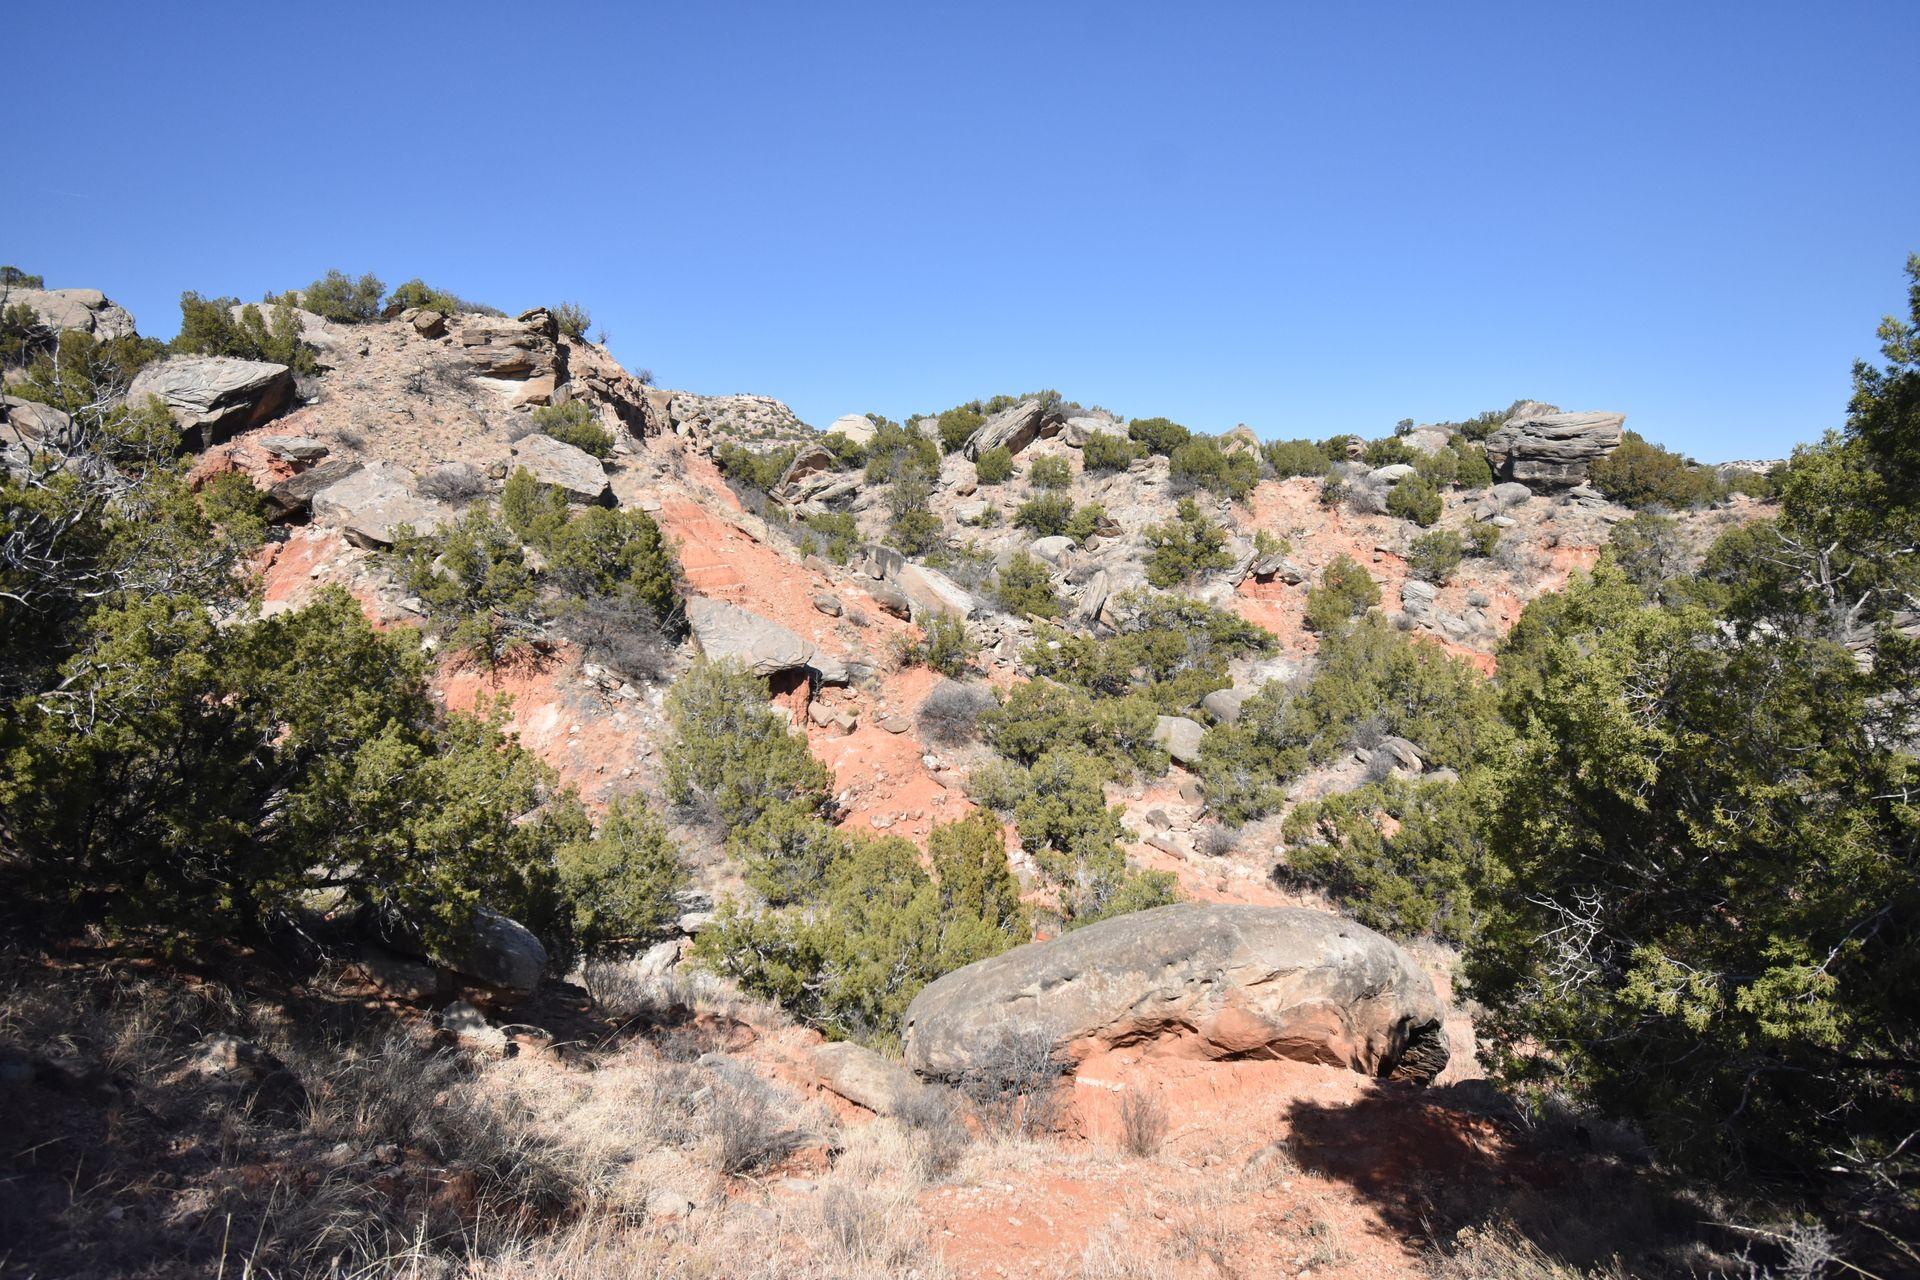 A pile of orange rocks with green bushes scattered around on the Rock Garden Trail.